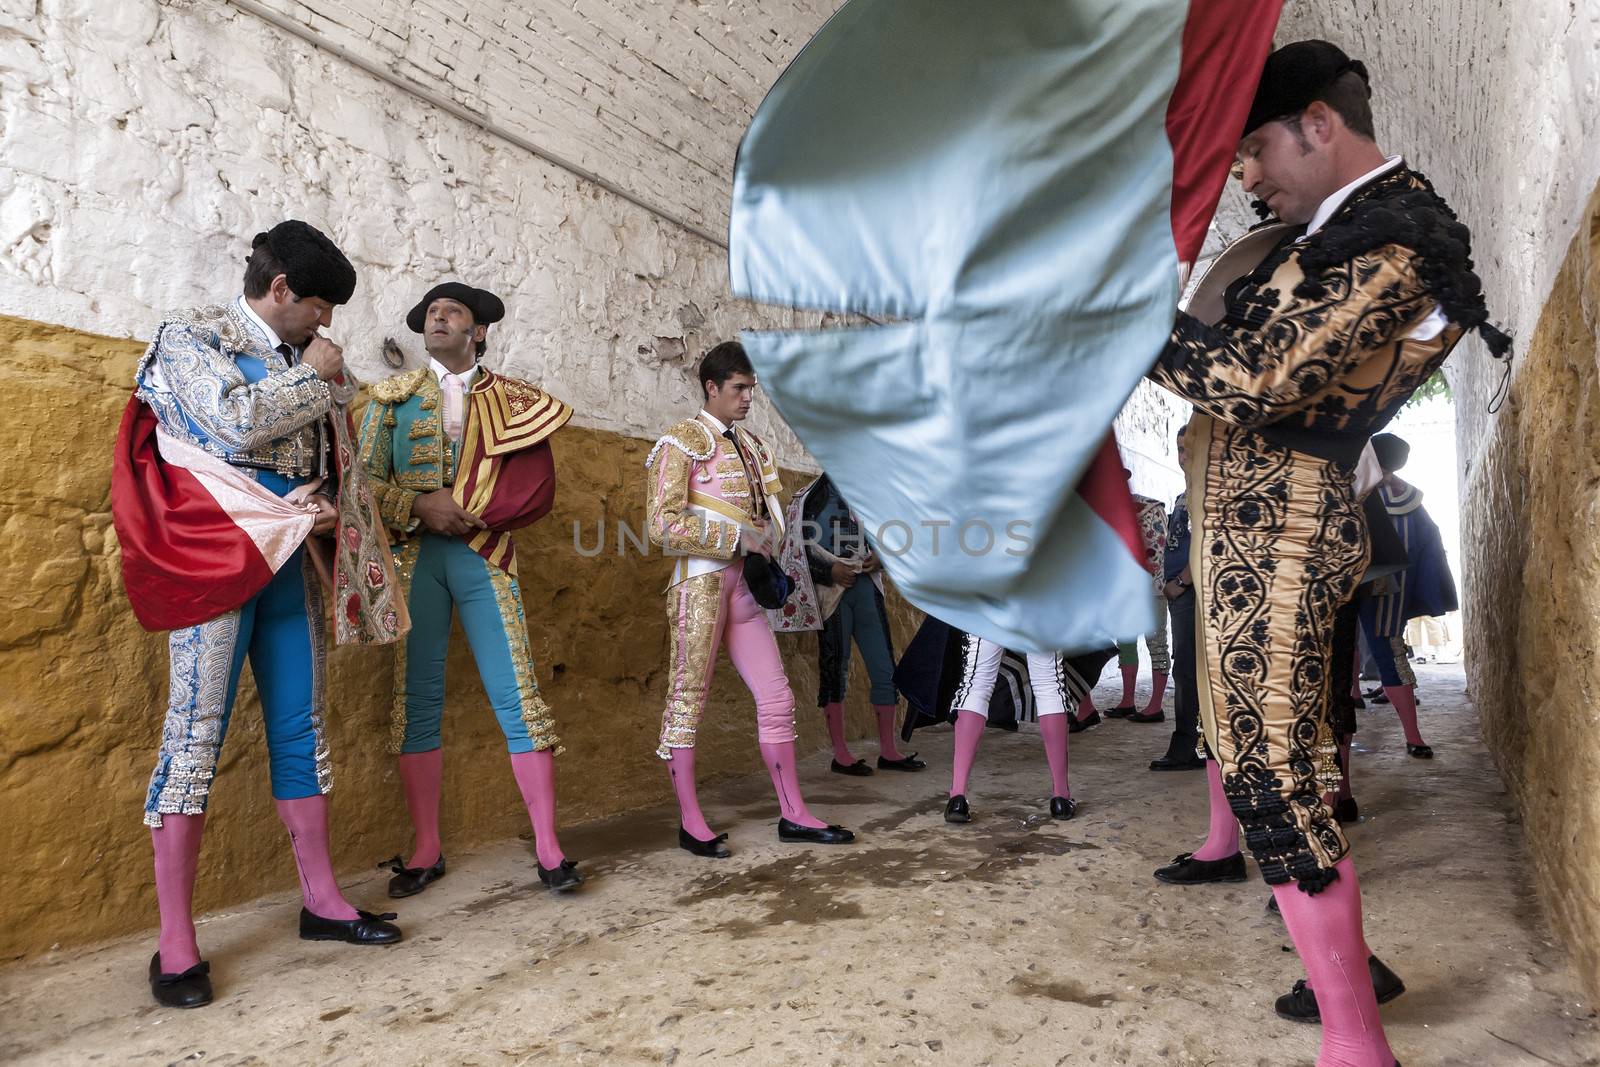 Andujar, Jaen province, SPAIN - 10 september 2011: Bullfighters at the paseillo or initial parade, to the right a bullfighter is trying to catch the capote walk from blue color in the bullfight at Andujar bullring, Andujar, Jaen province, Andalusia, Spain